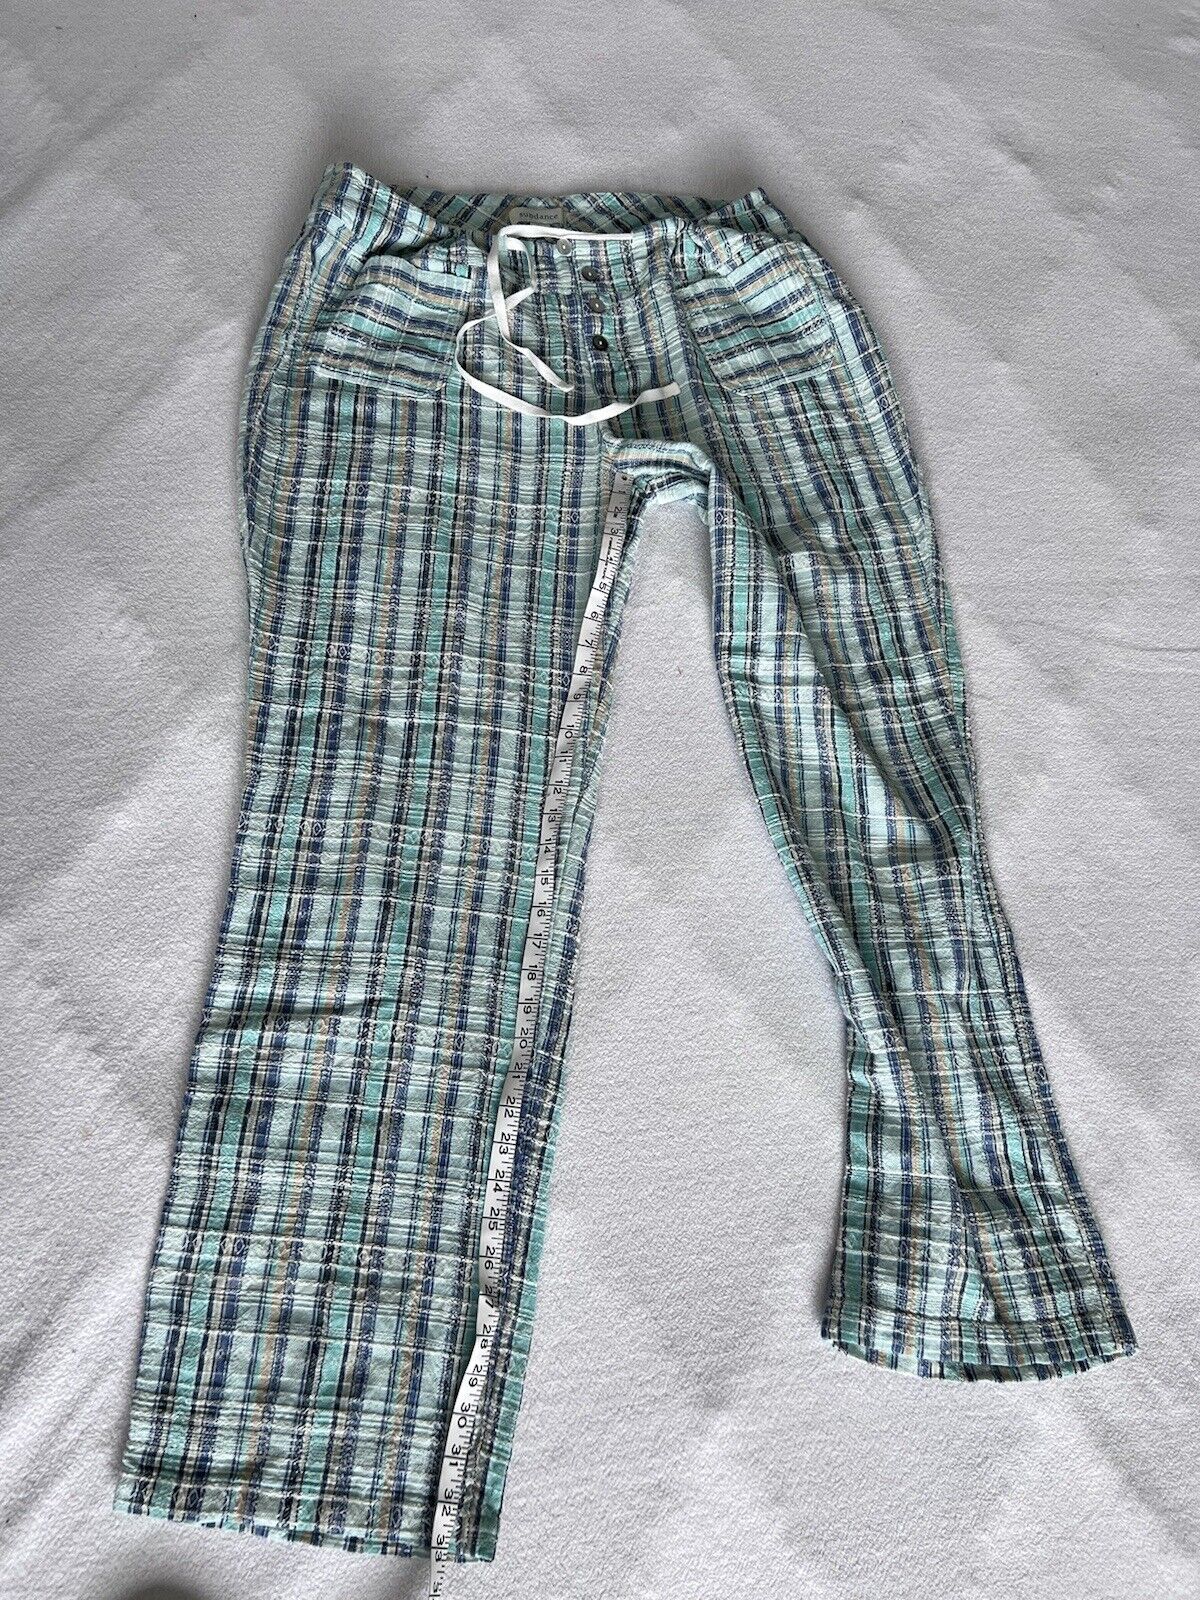 Sundance Women’s Blue and Green Trousers  Size XL - image 10